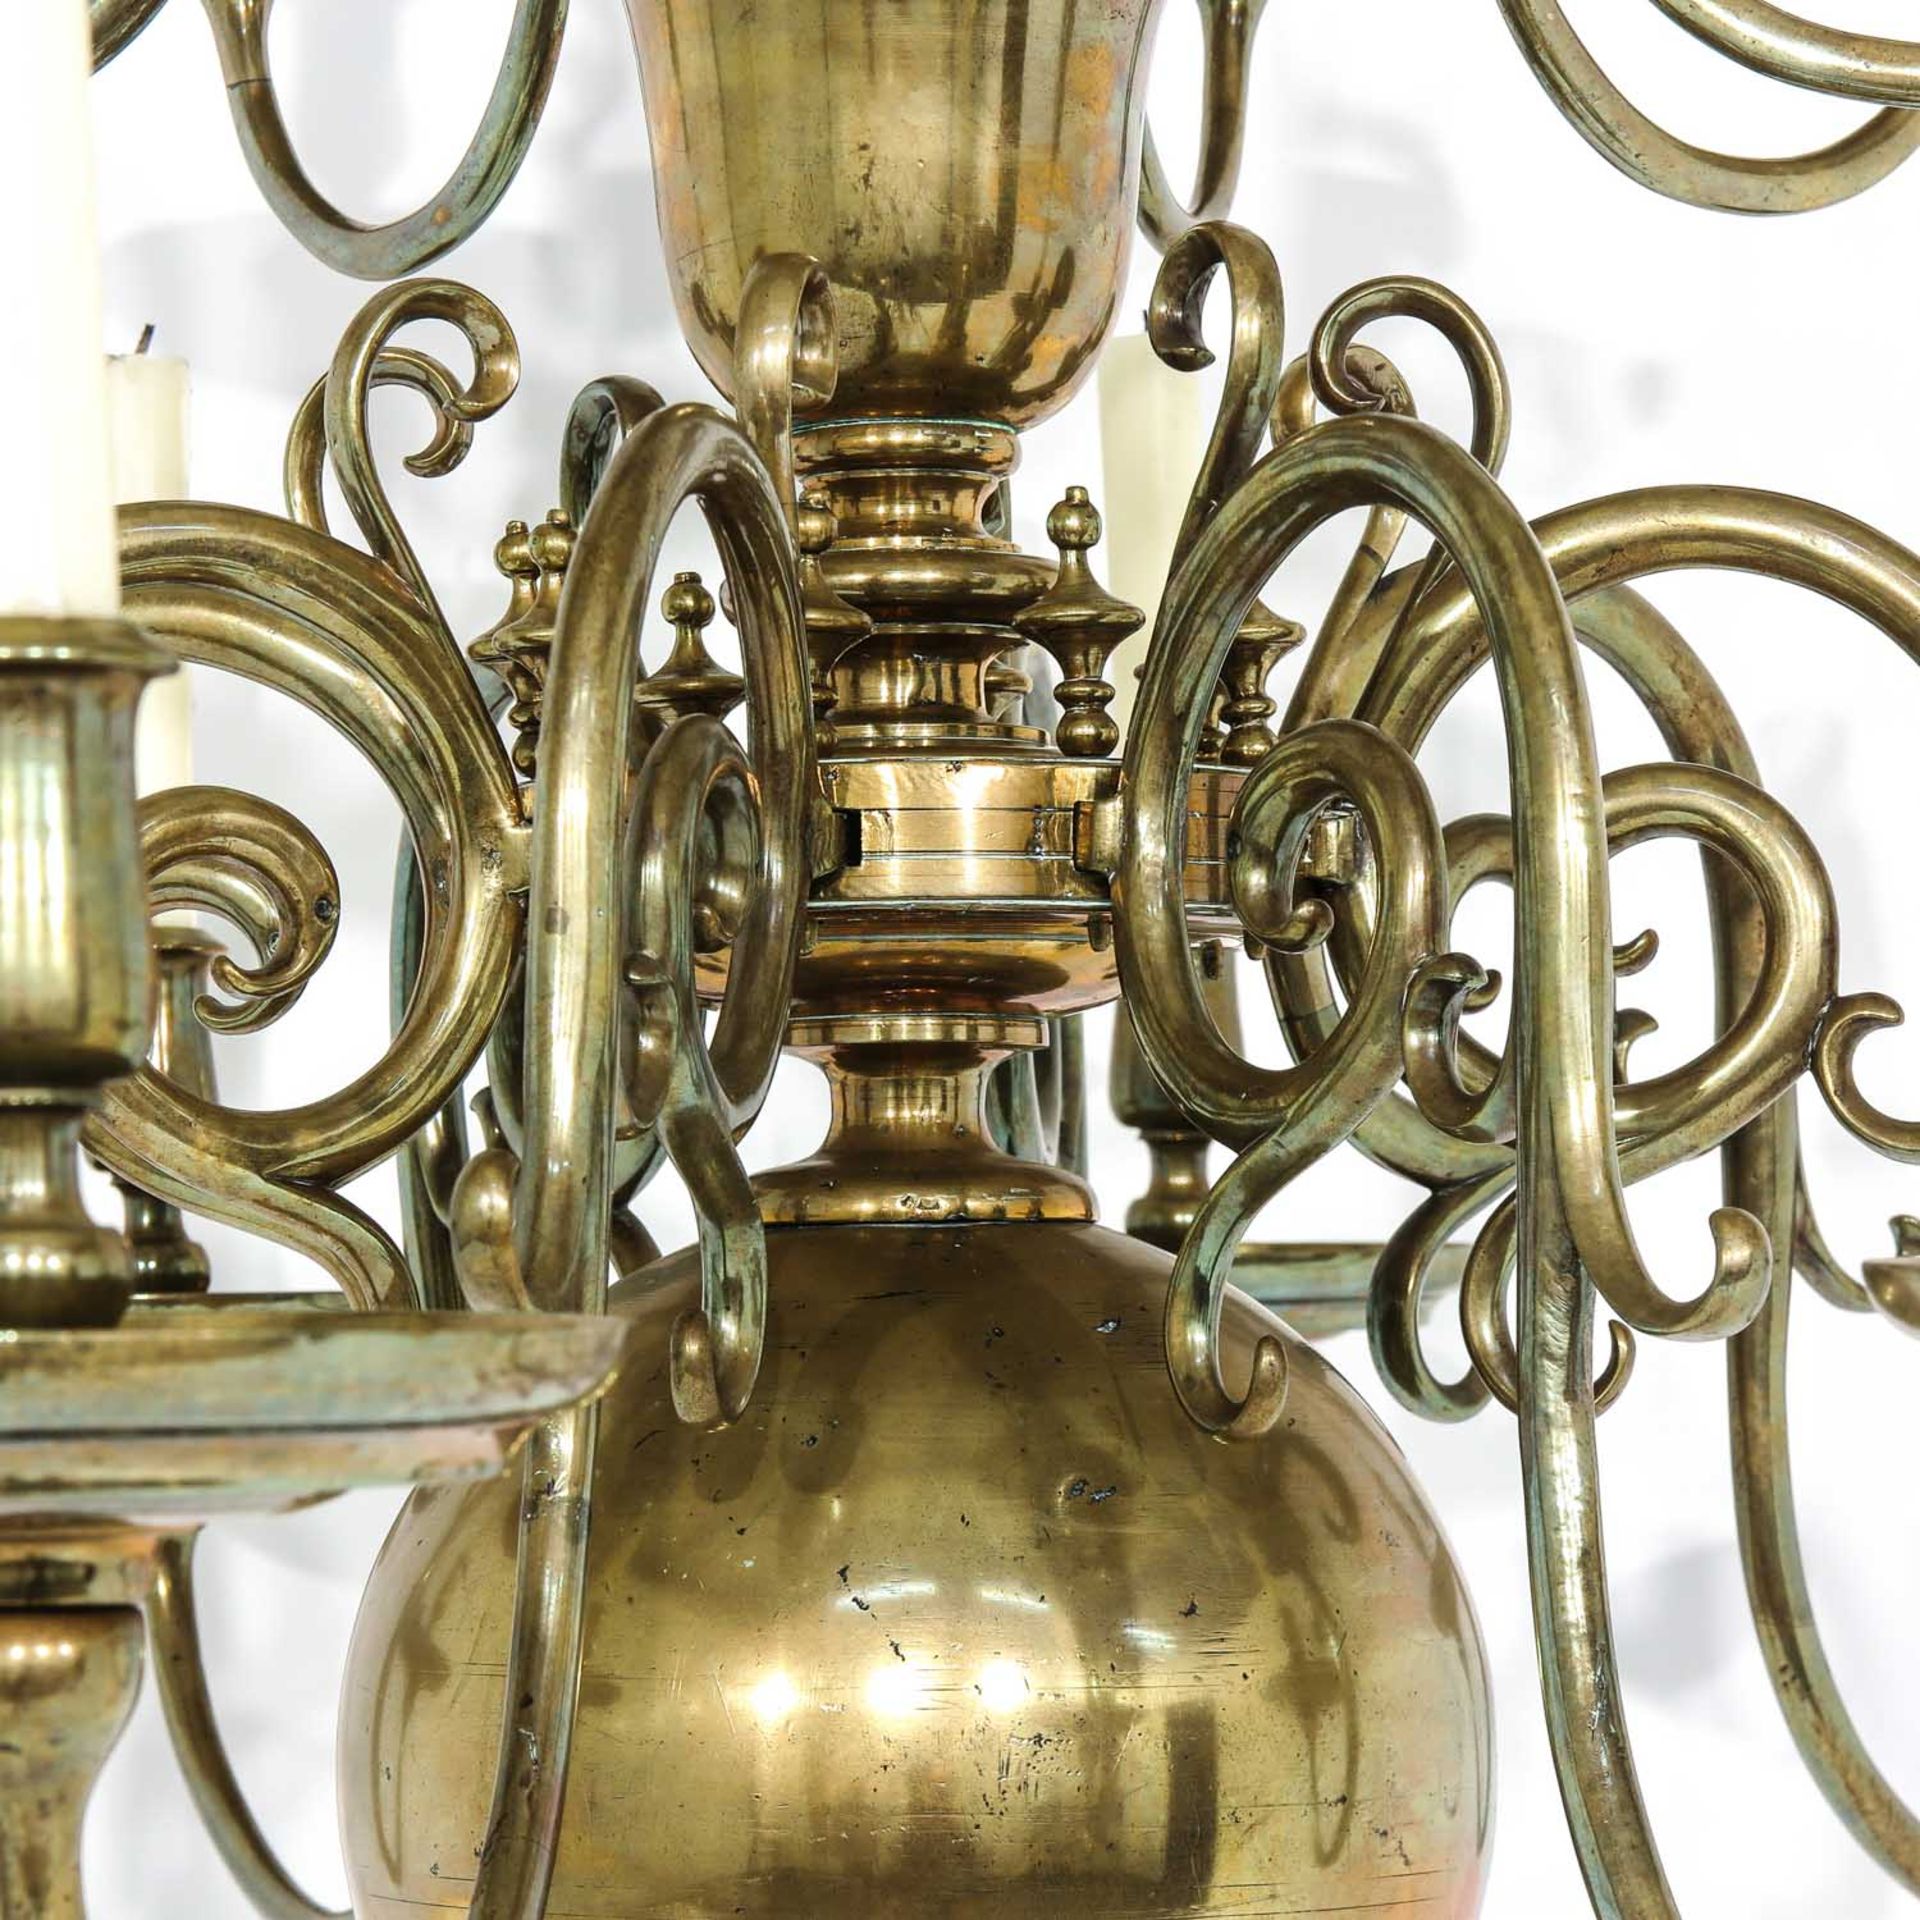 A Rare Example of a Renaissance Period Chandelier - Image 4 of 8